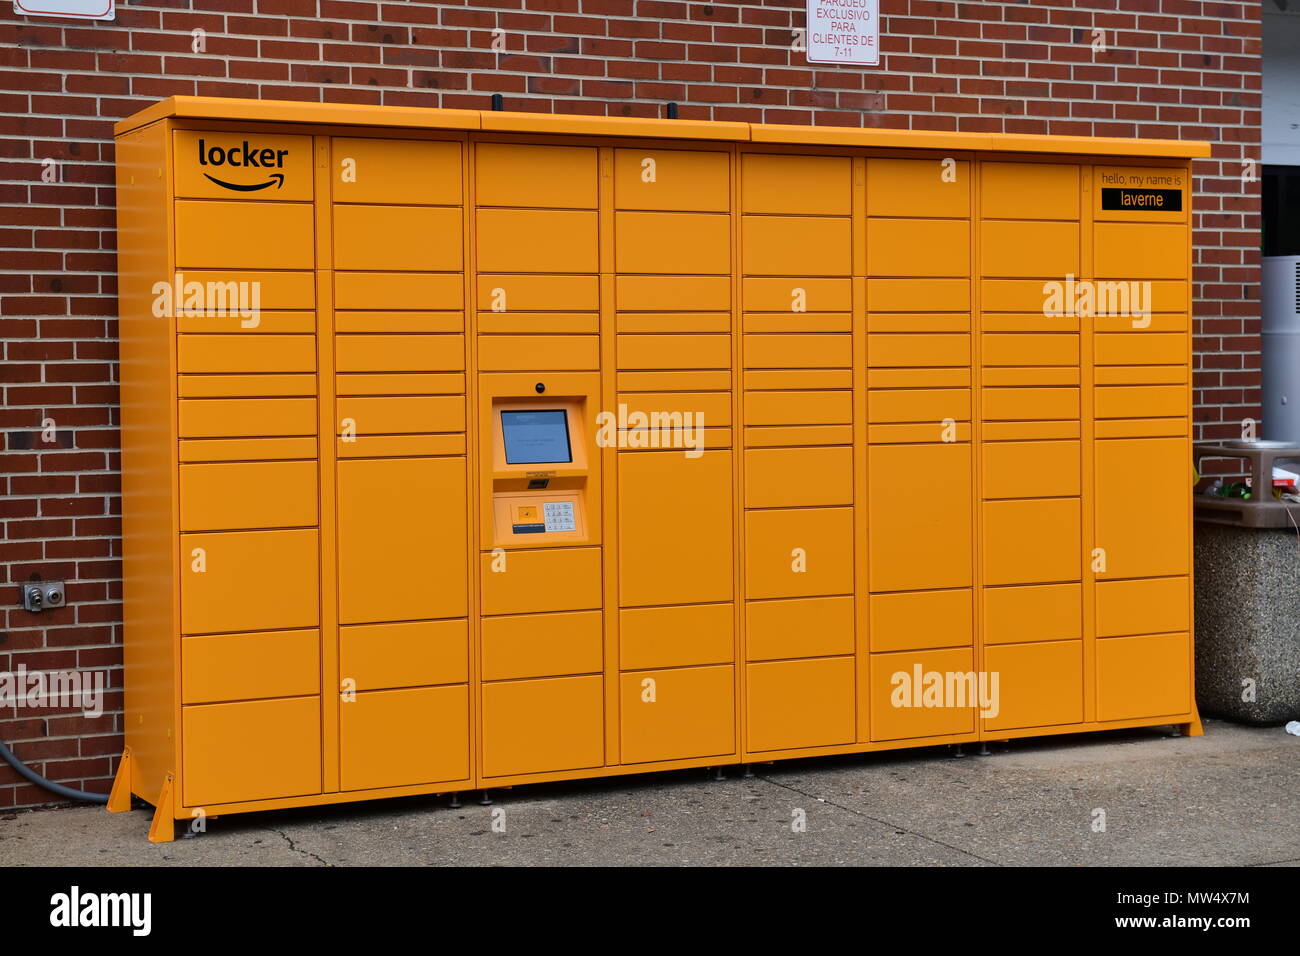 Amazon Locker a secure delivery system that Amazon uses at public places for pick up and returns of packages Stock Photo